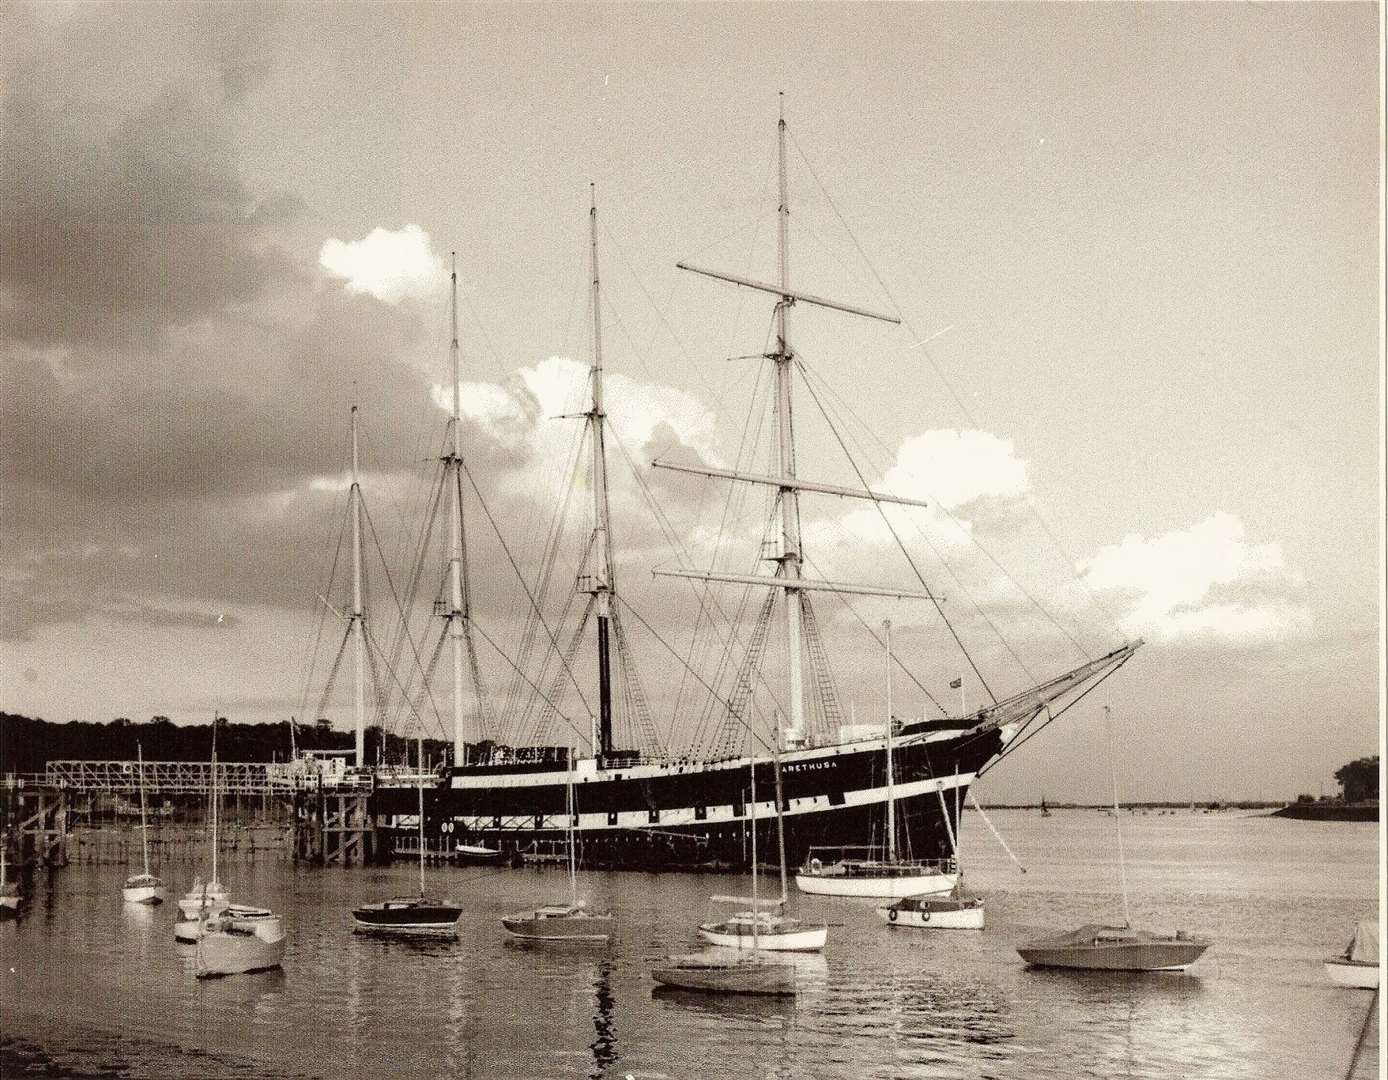 The Arethusa lies peacefully at her Upnor moorings